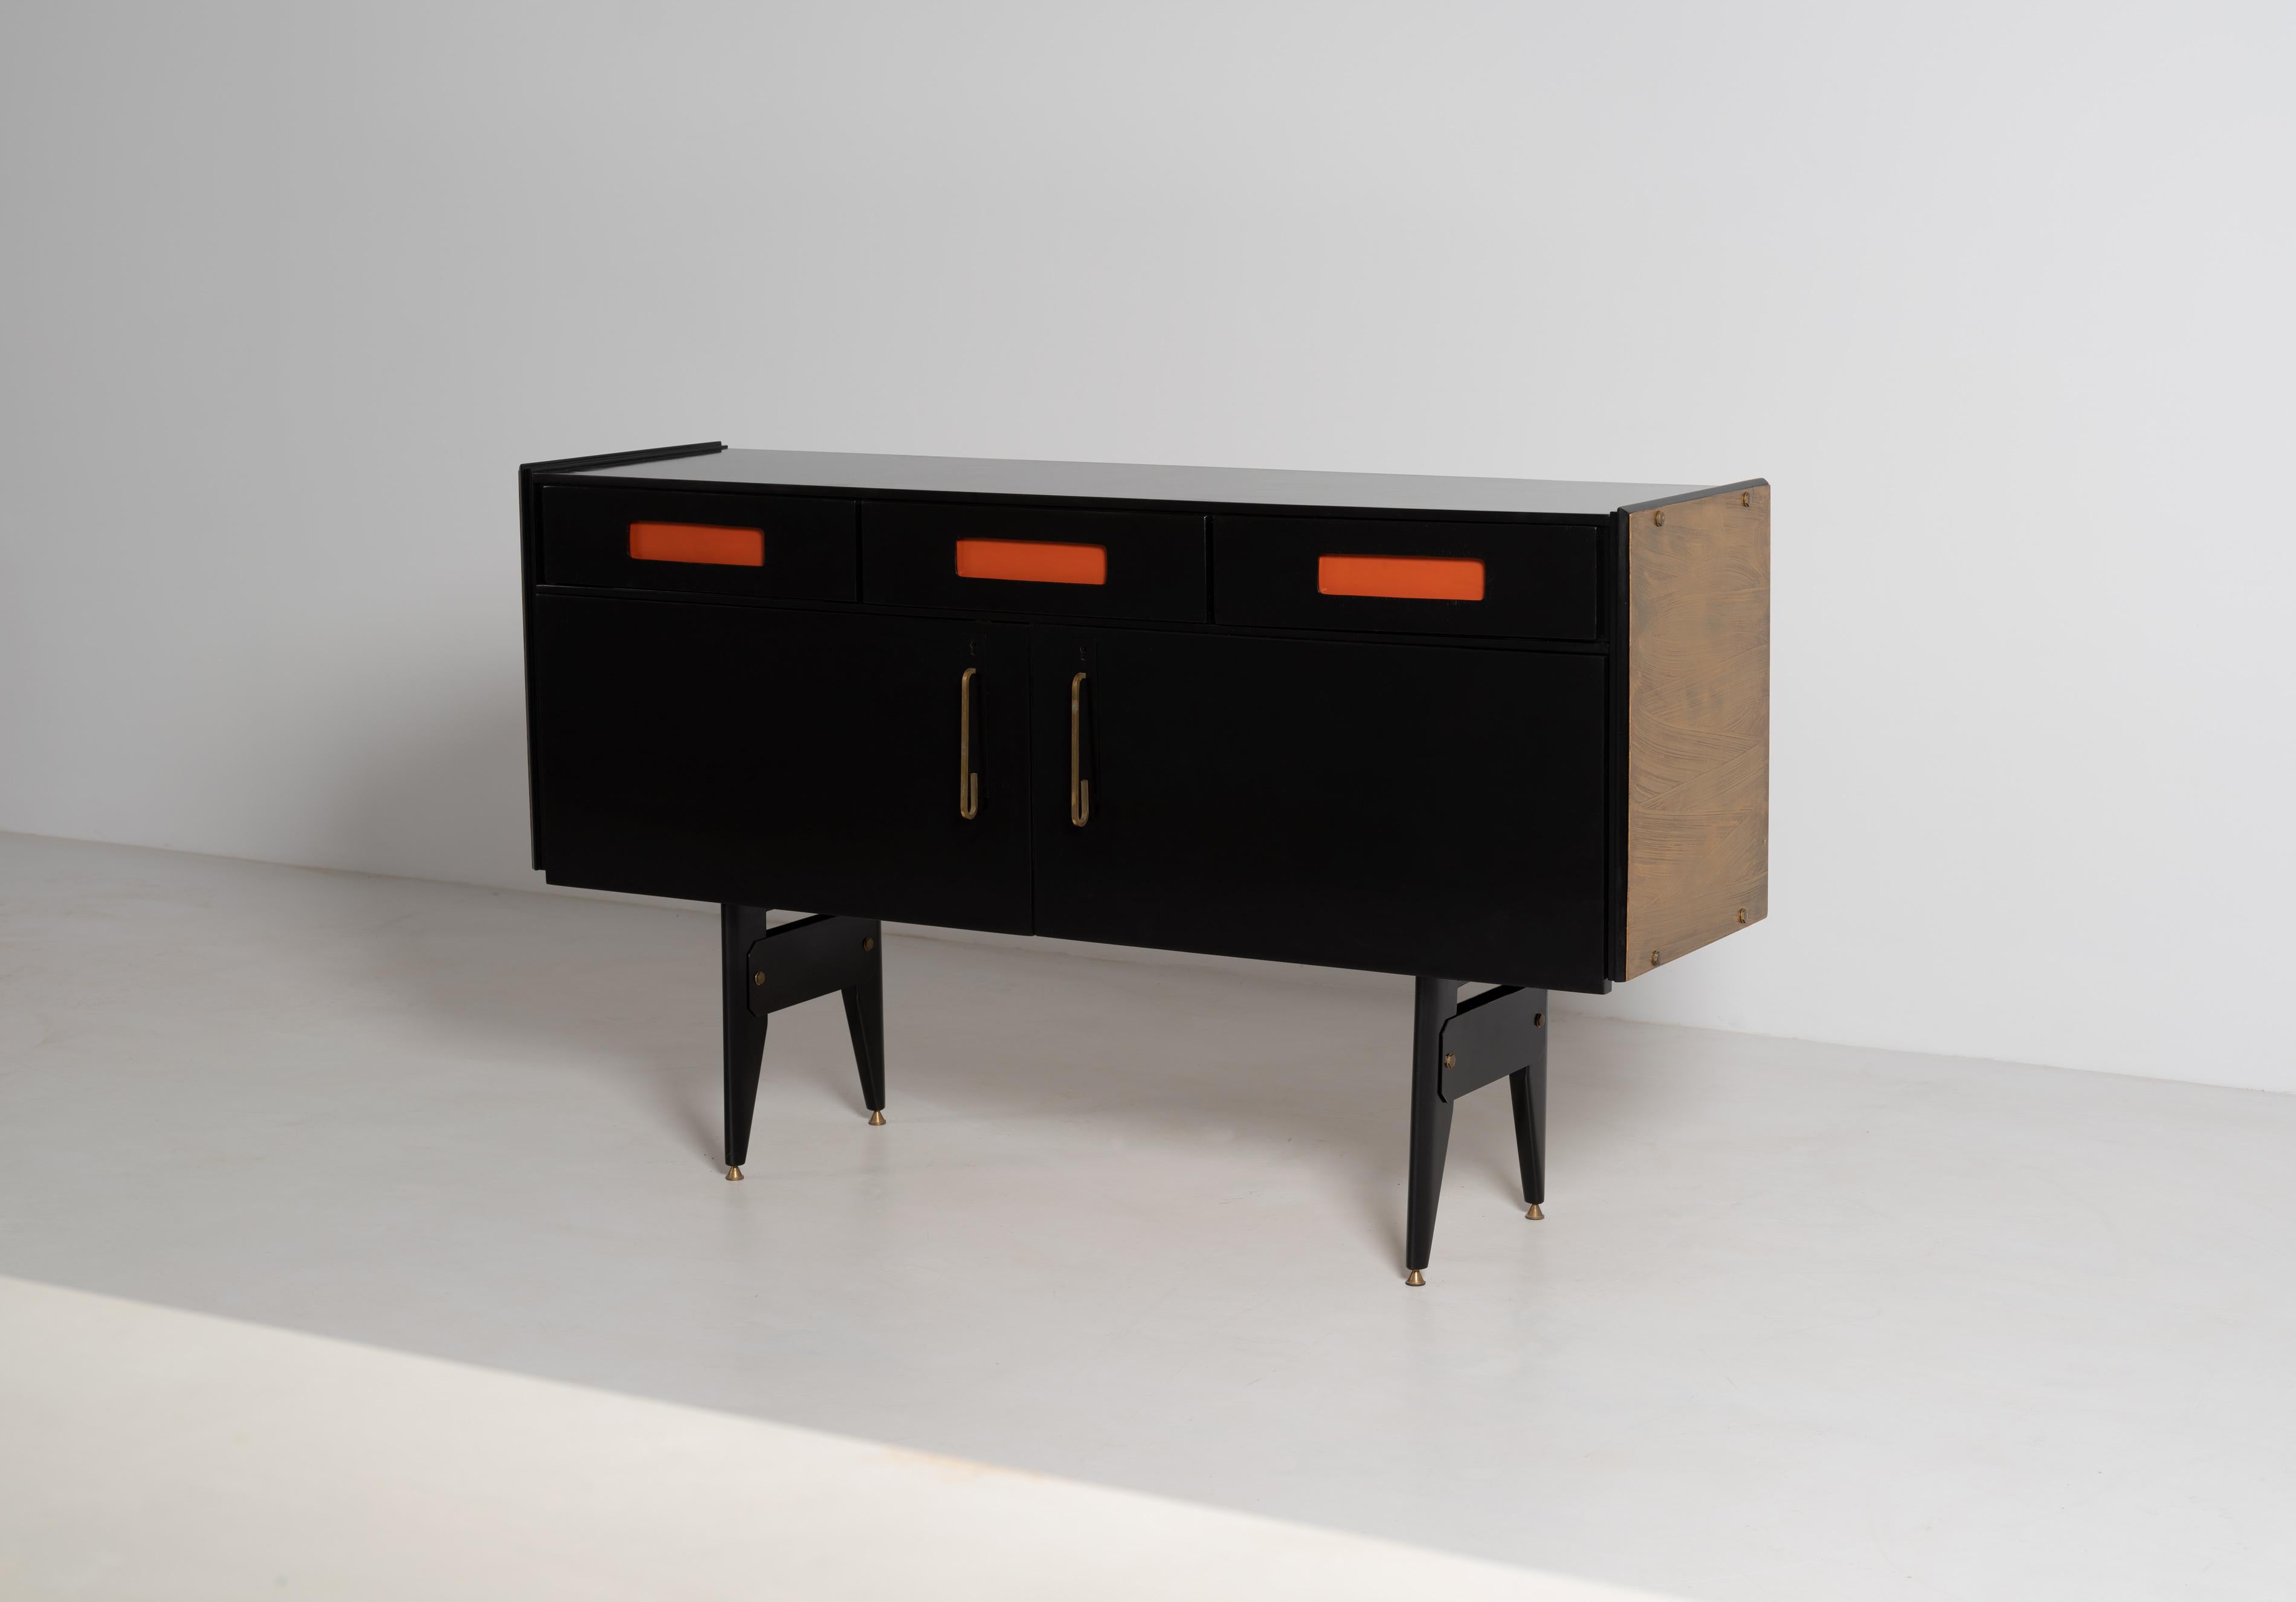 Introducing our exquisite restyled and restored midcentury sideboard, exuding a modern Italian design. This versatile piece, known as a credenza or low-profile mobile for the living room, has undergone a comprehensive restoration process, including